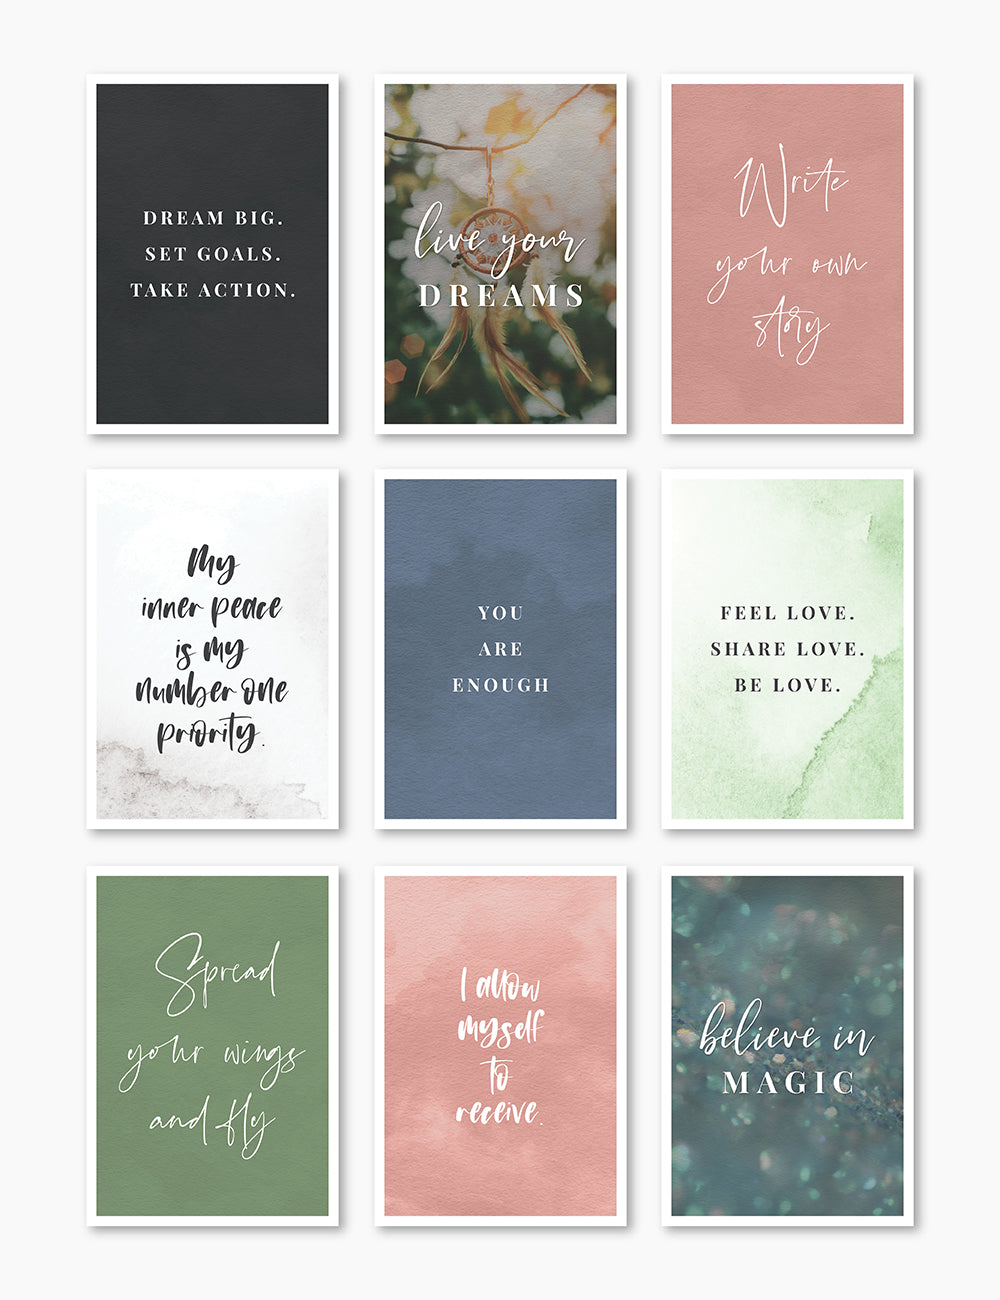 Printable Vision Board Kit 02: Affirmation Cards and Inspirational